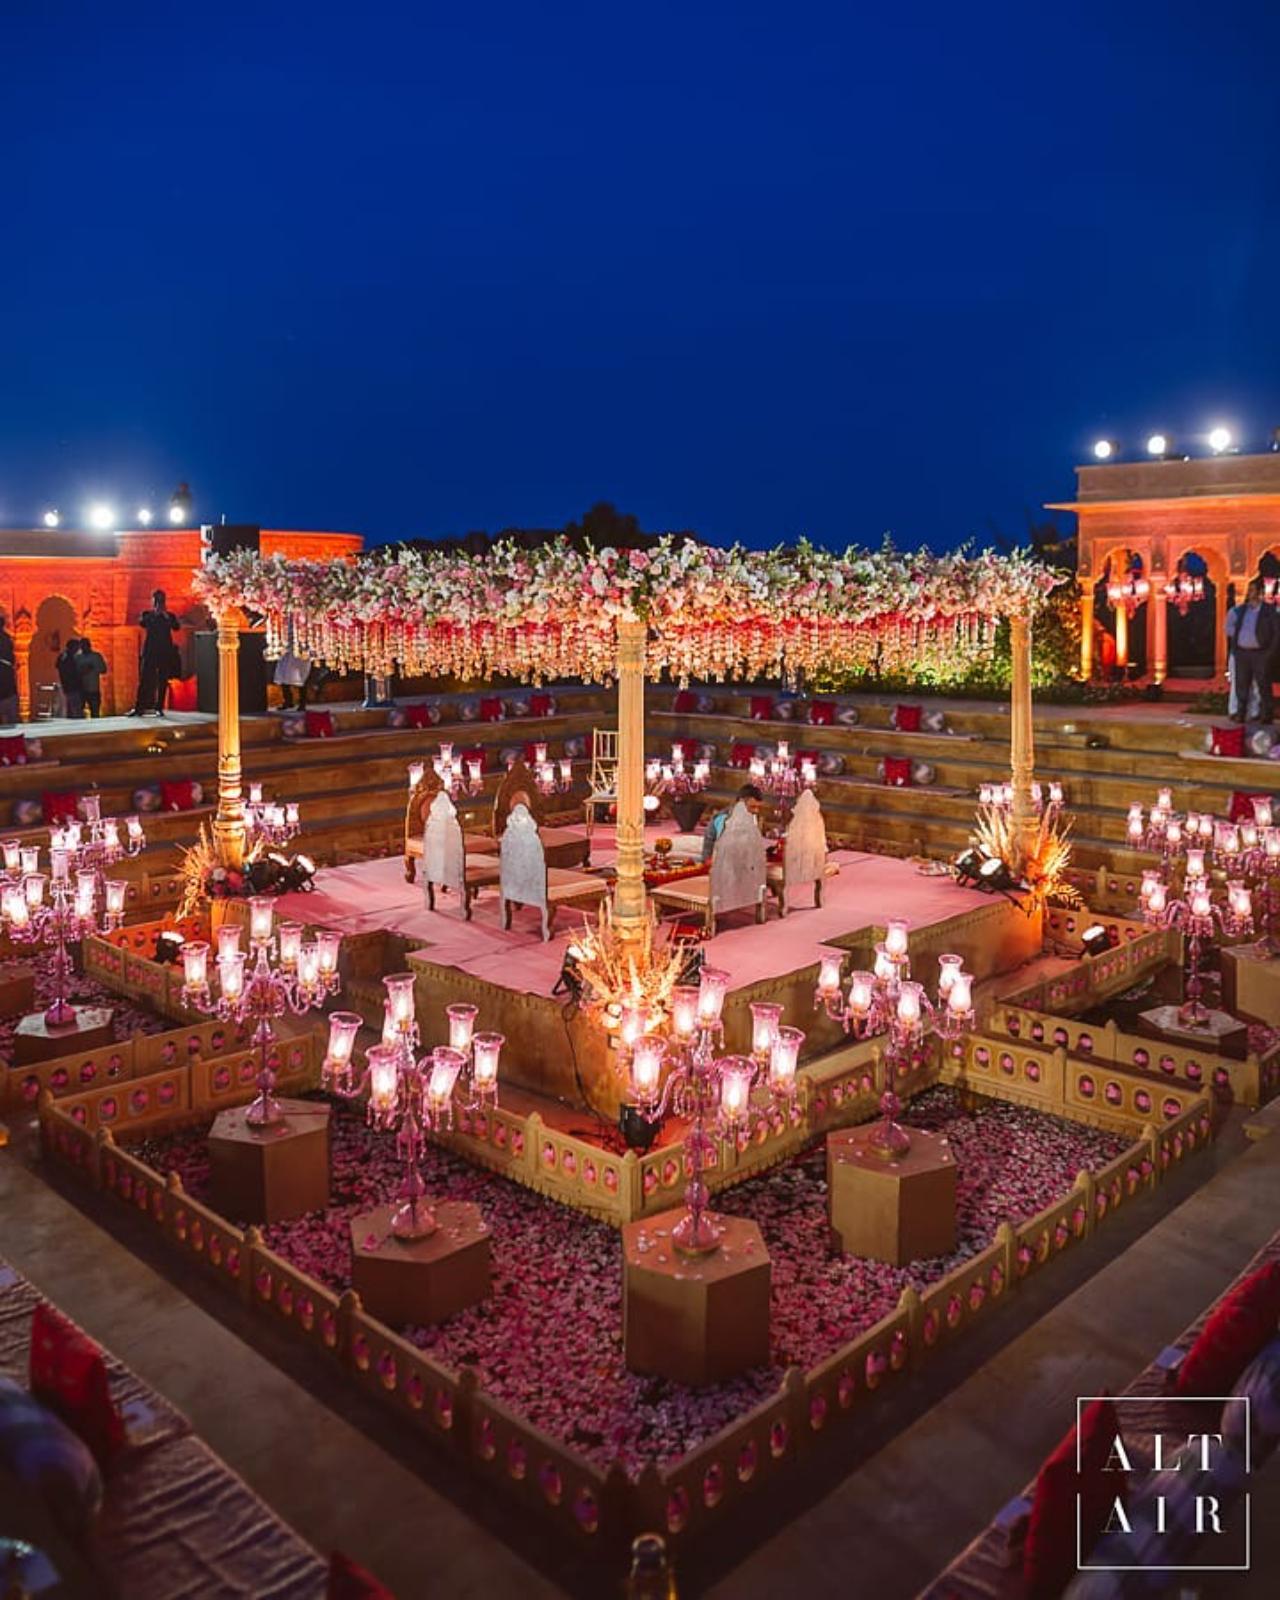 This is the mandap area where Sidharth and Kiara will tie the knot on February 6 in the presence of their family and friends.  About 150 guests have been invited to the star couple's wedding, a source said, adding: 